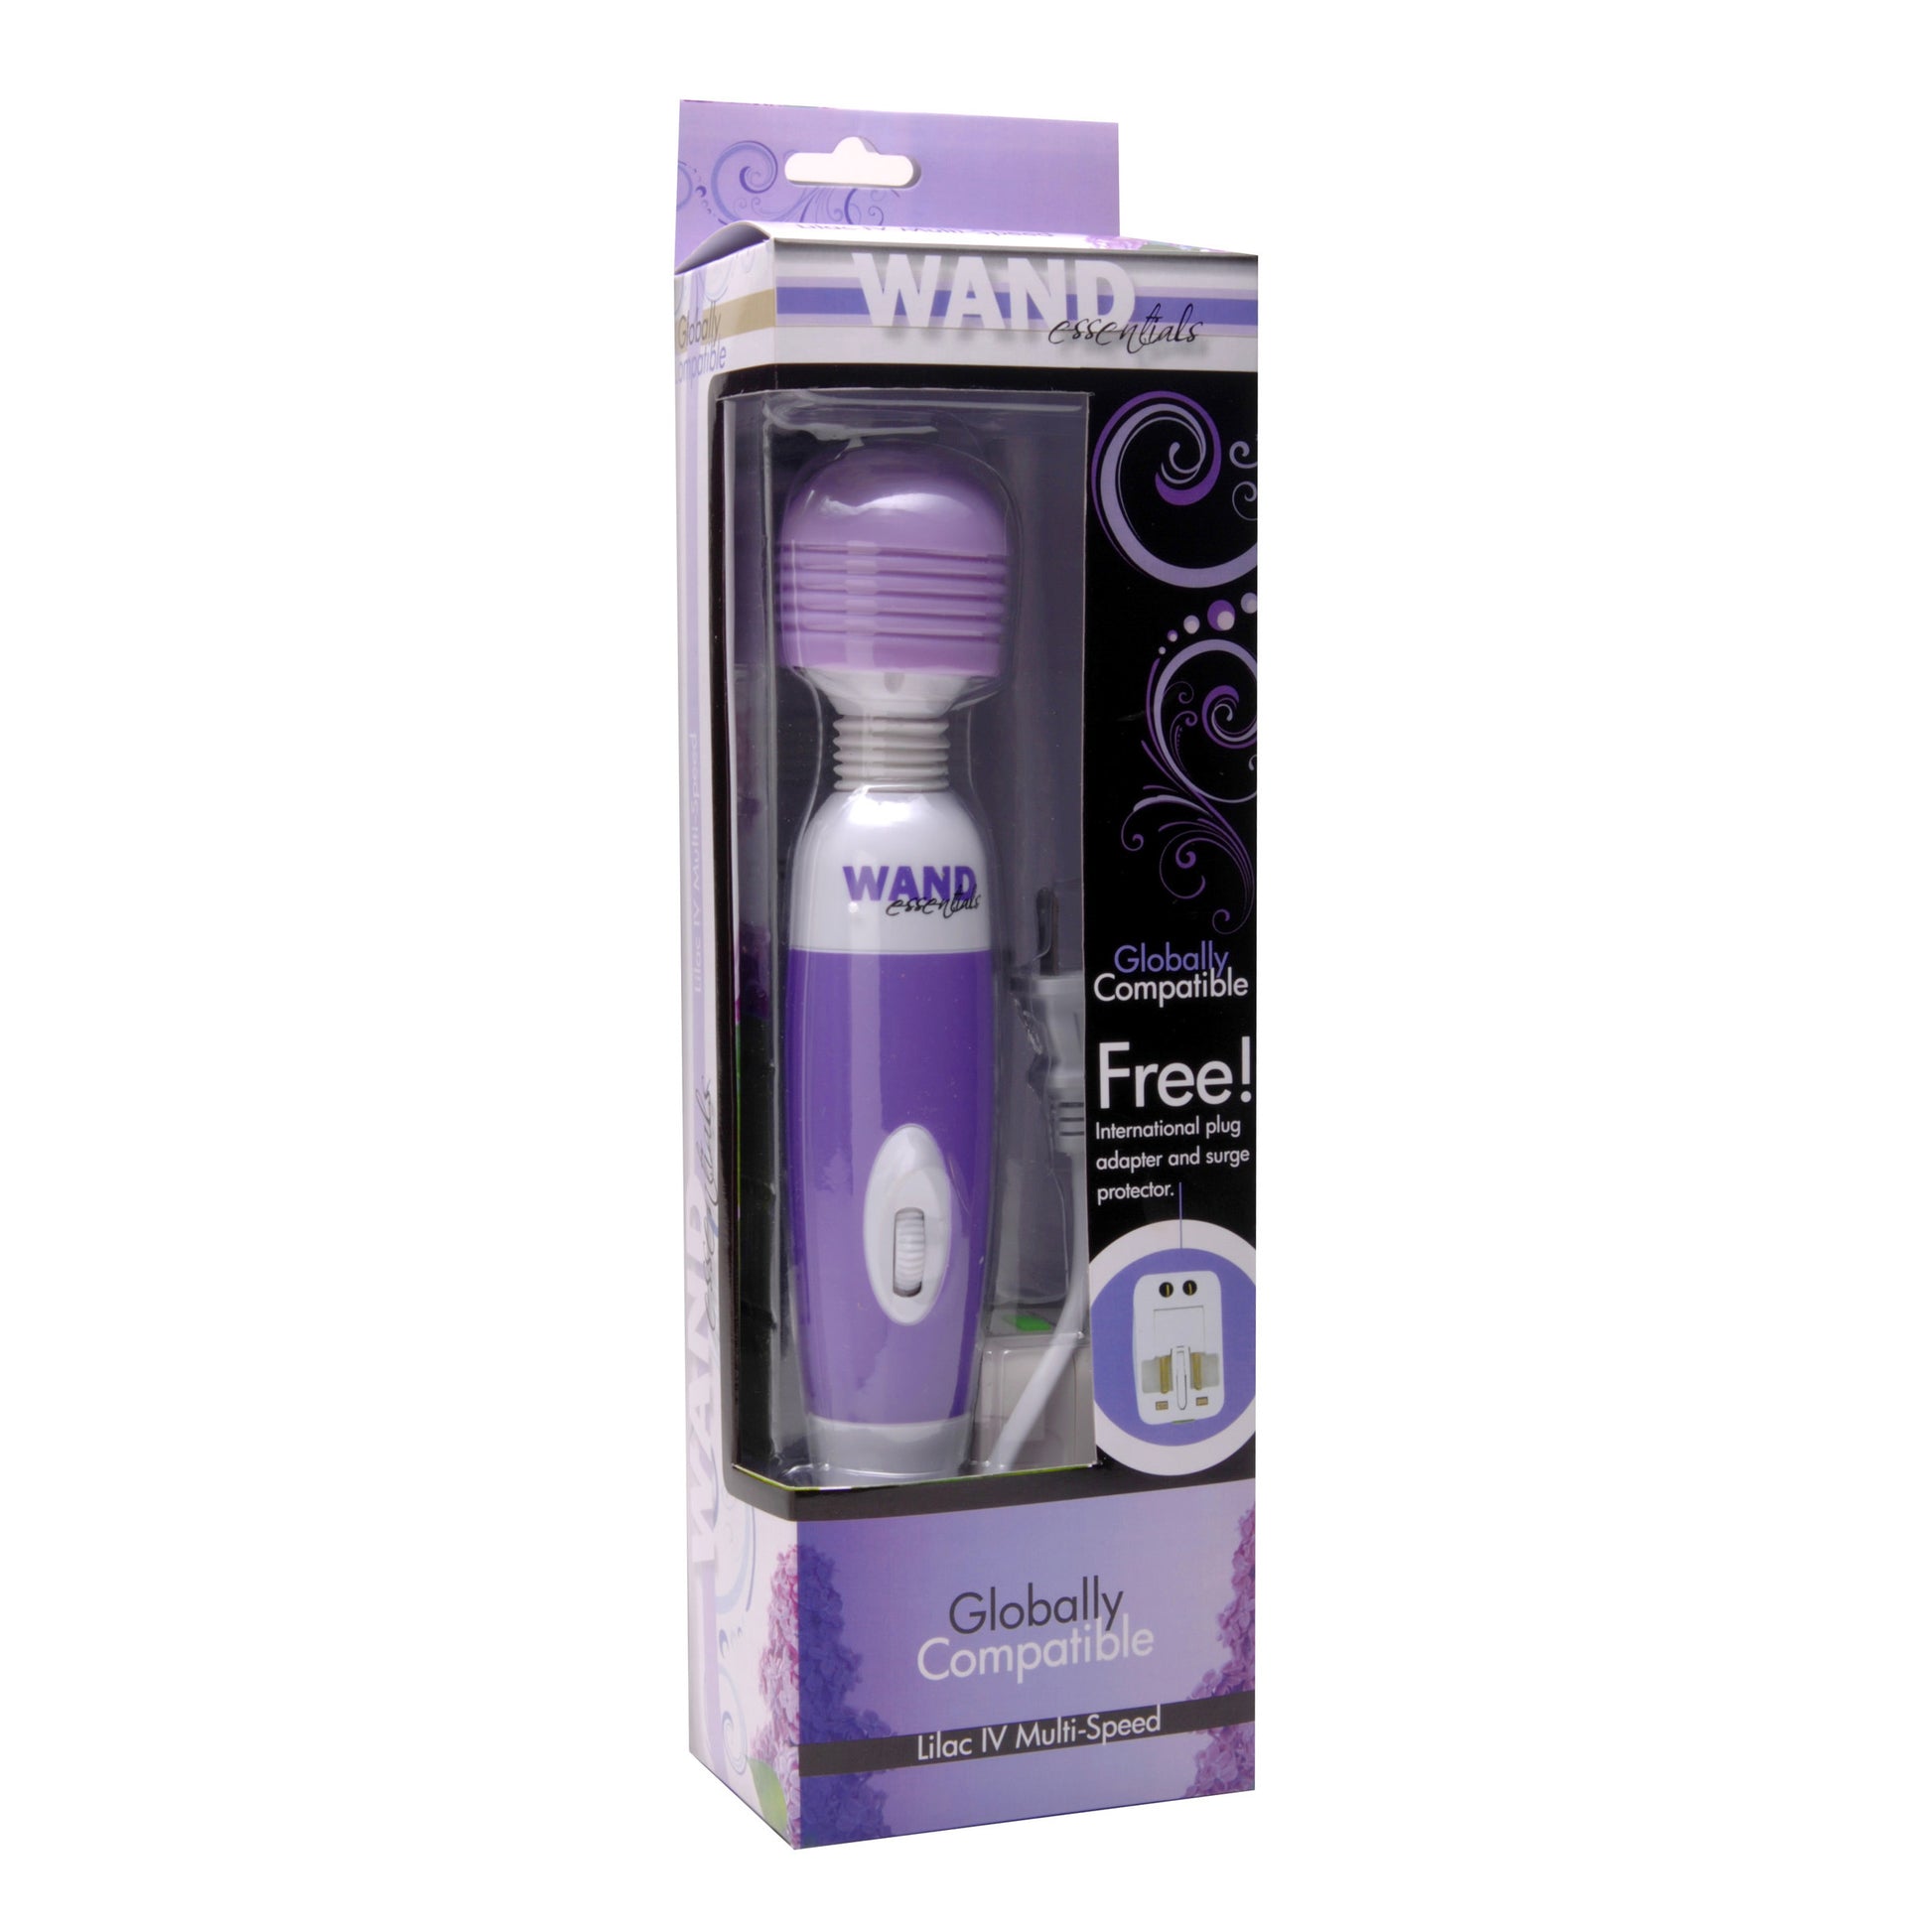 Lilac IV Multi Speed Globally Compatible Wand Massager - UABDSM